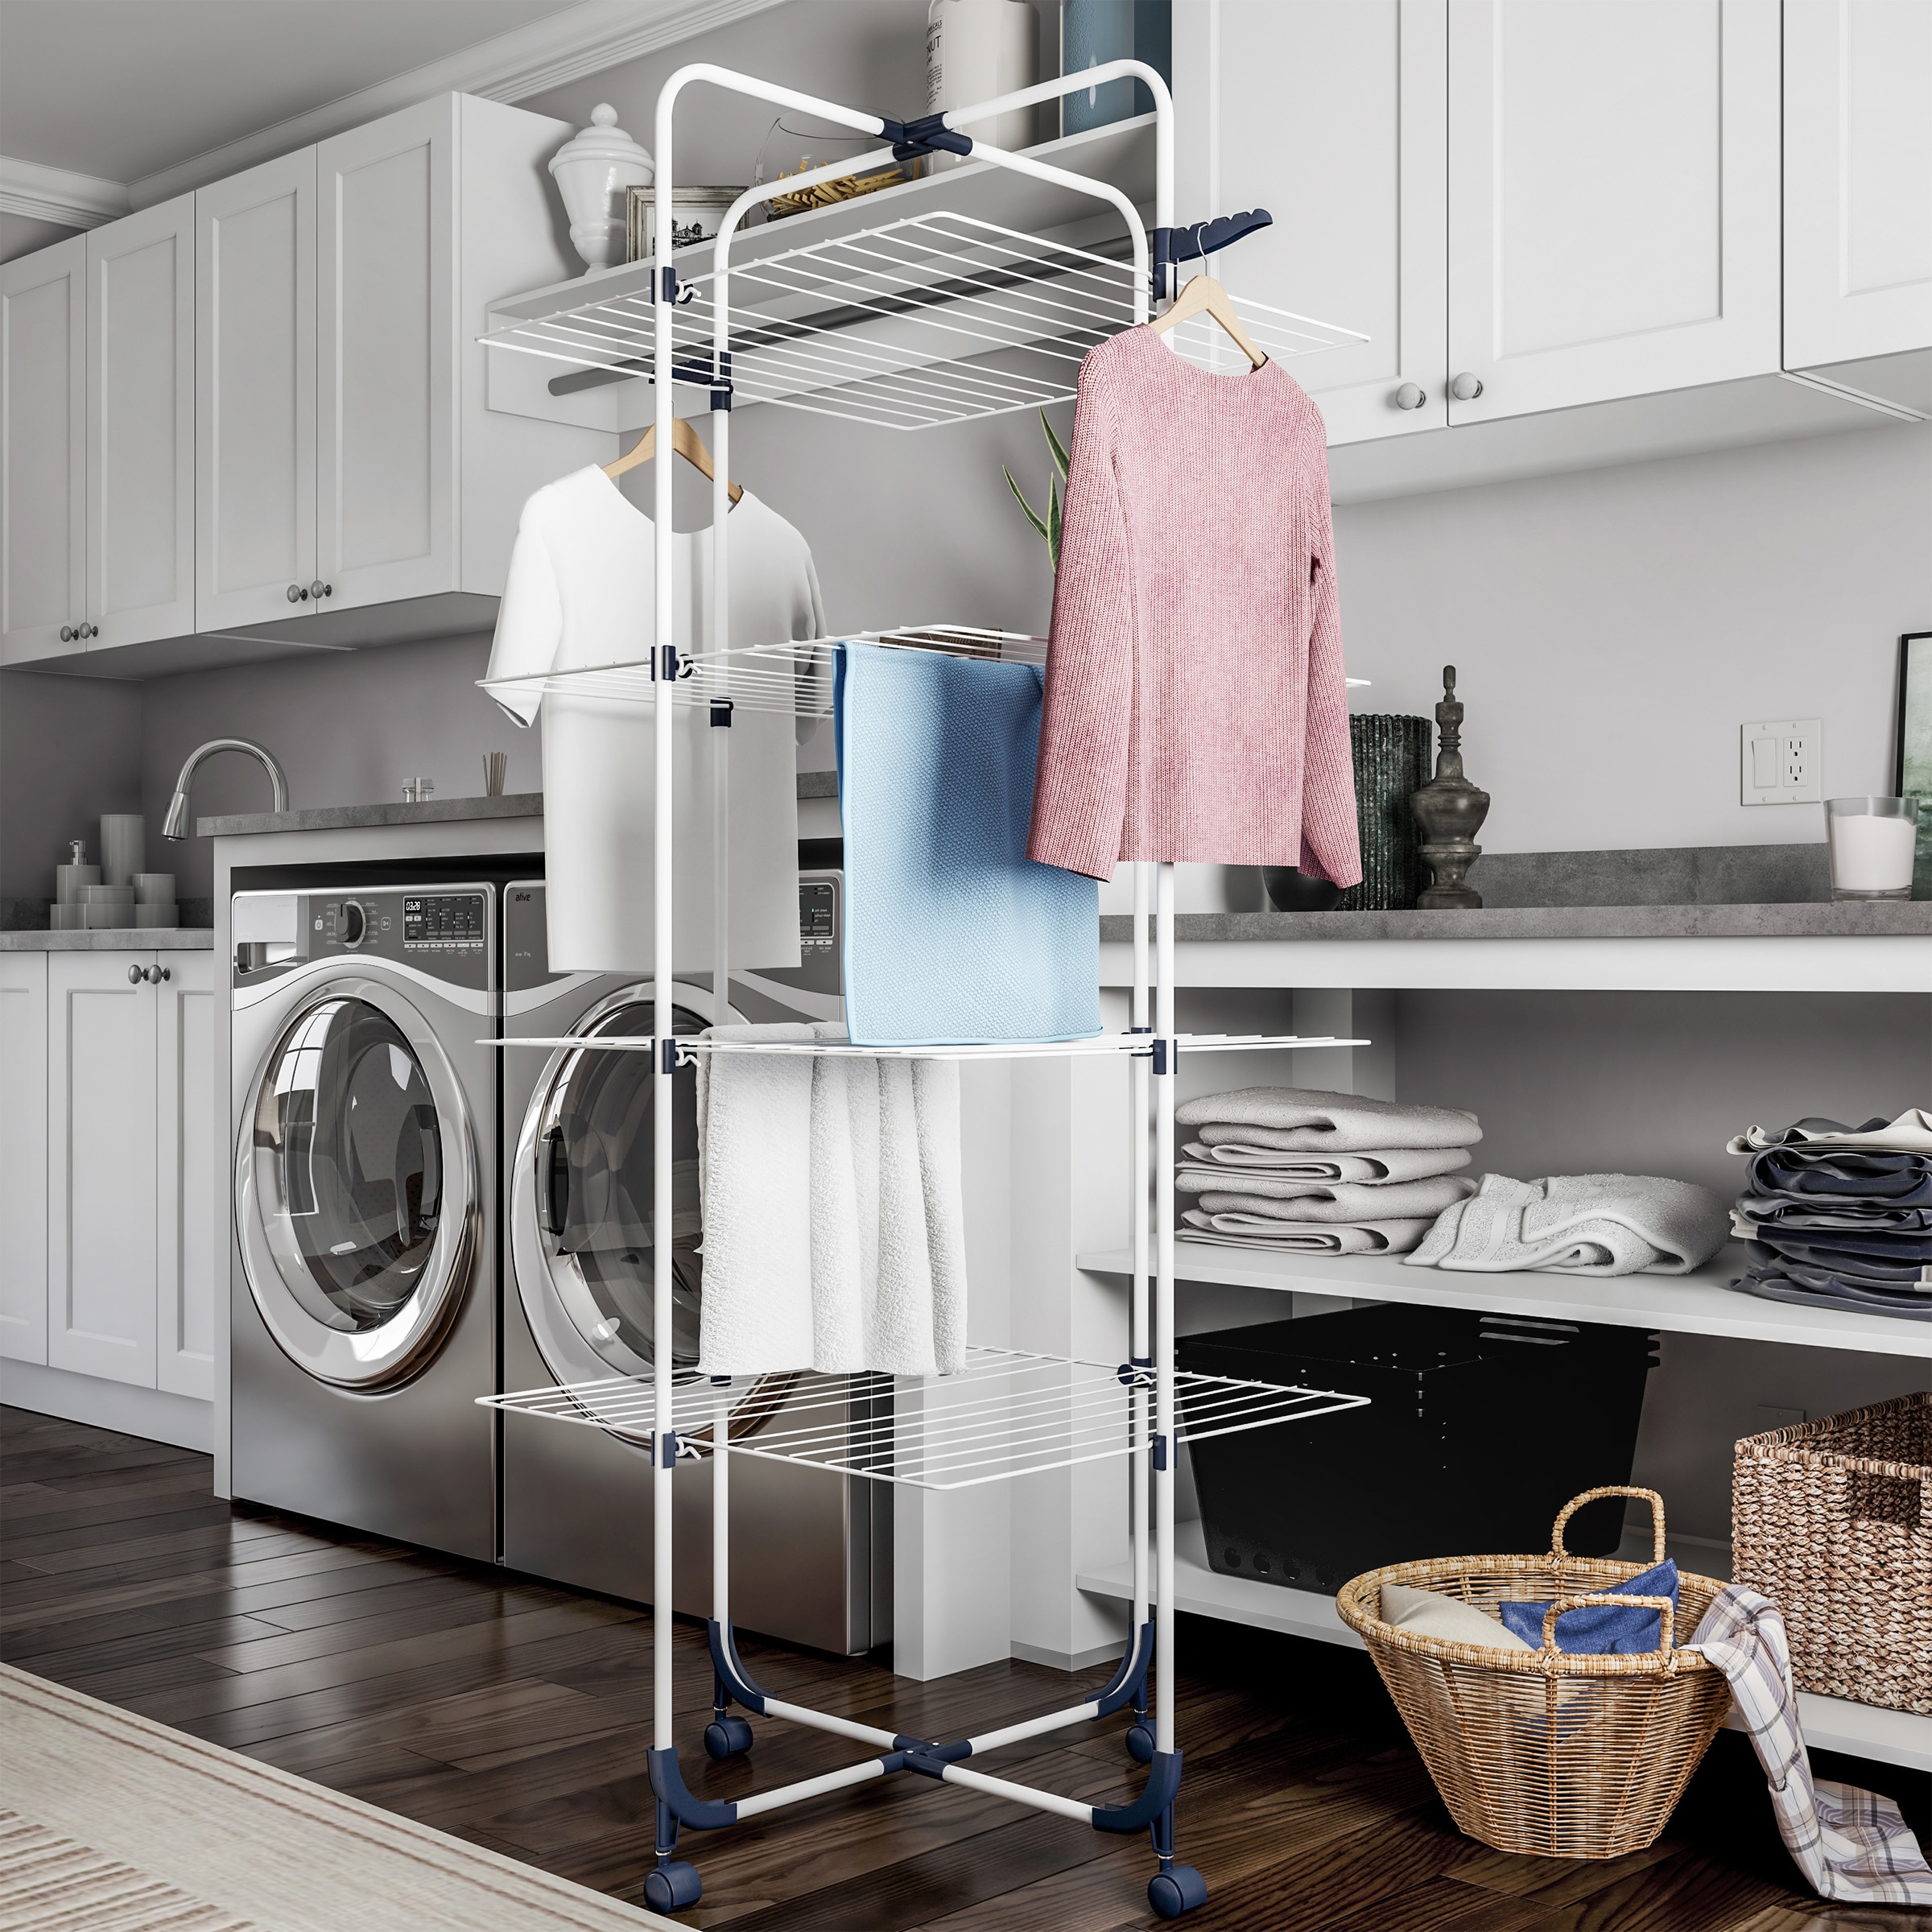 Della 15KG Compact Electric Portable Energy Saving Clothing Dryer Rack for  Homes, Dorms, Convenient in 30 Minutes - standard - Bed Bath & Beyond -  18729843